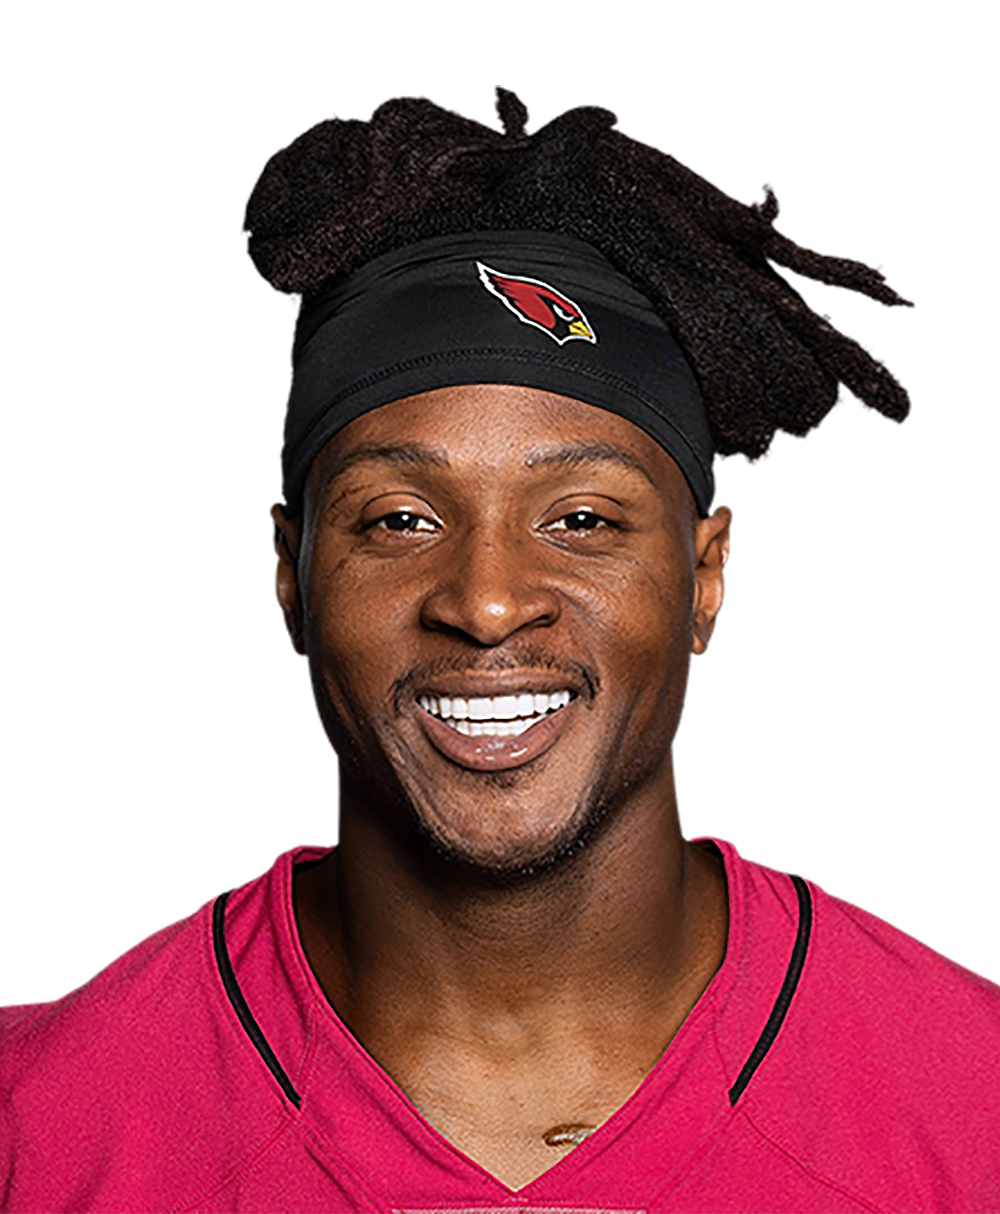 Titans' DeAndre Hopkins Calls Out Cowboys, Giants, 49ers, Lions for Not  Wanting Him, News, Scores, Highlights, Stats, and Rumors